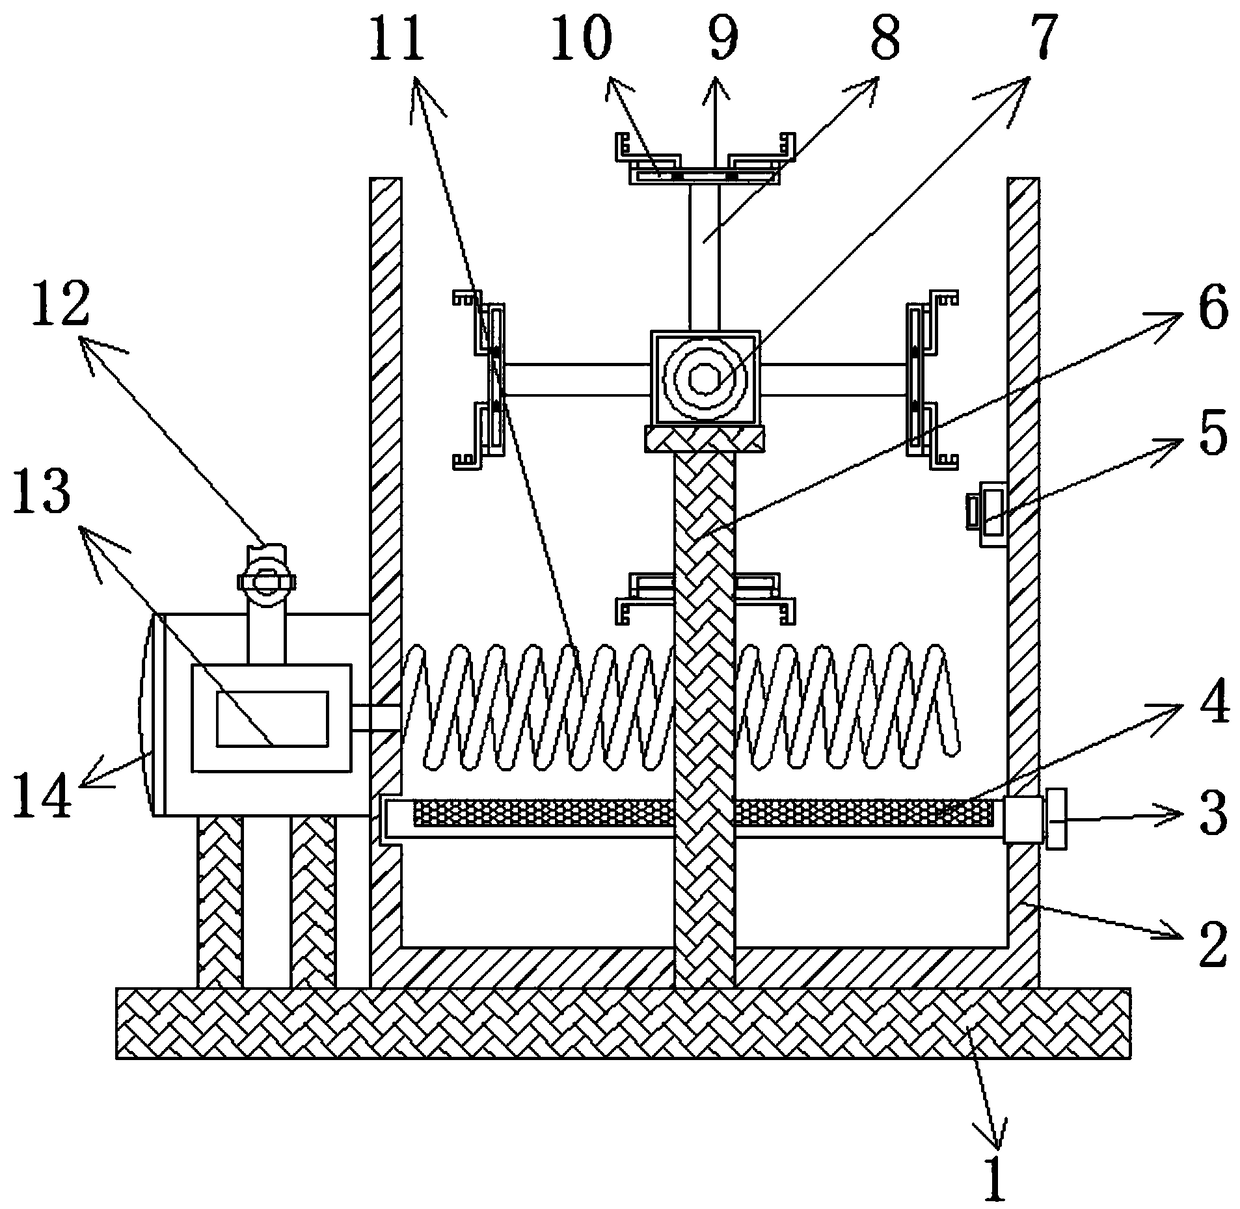 Panel soaking device for panel furniture processing